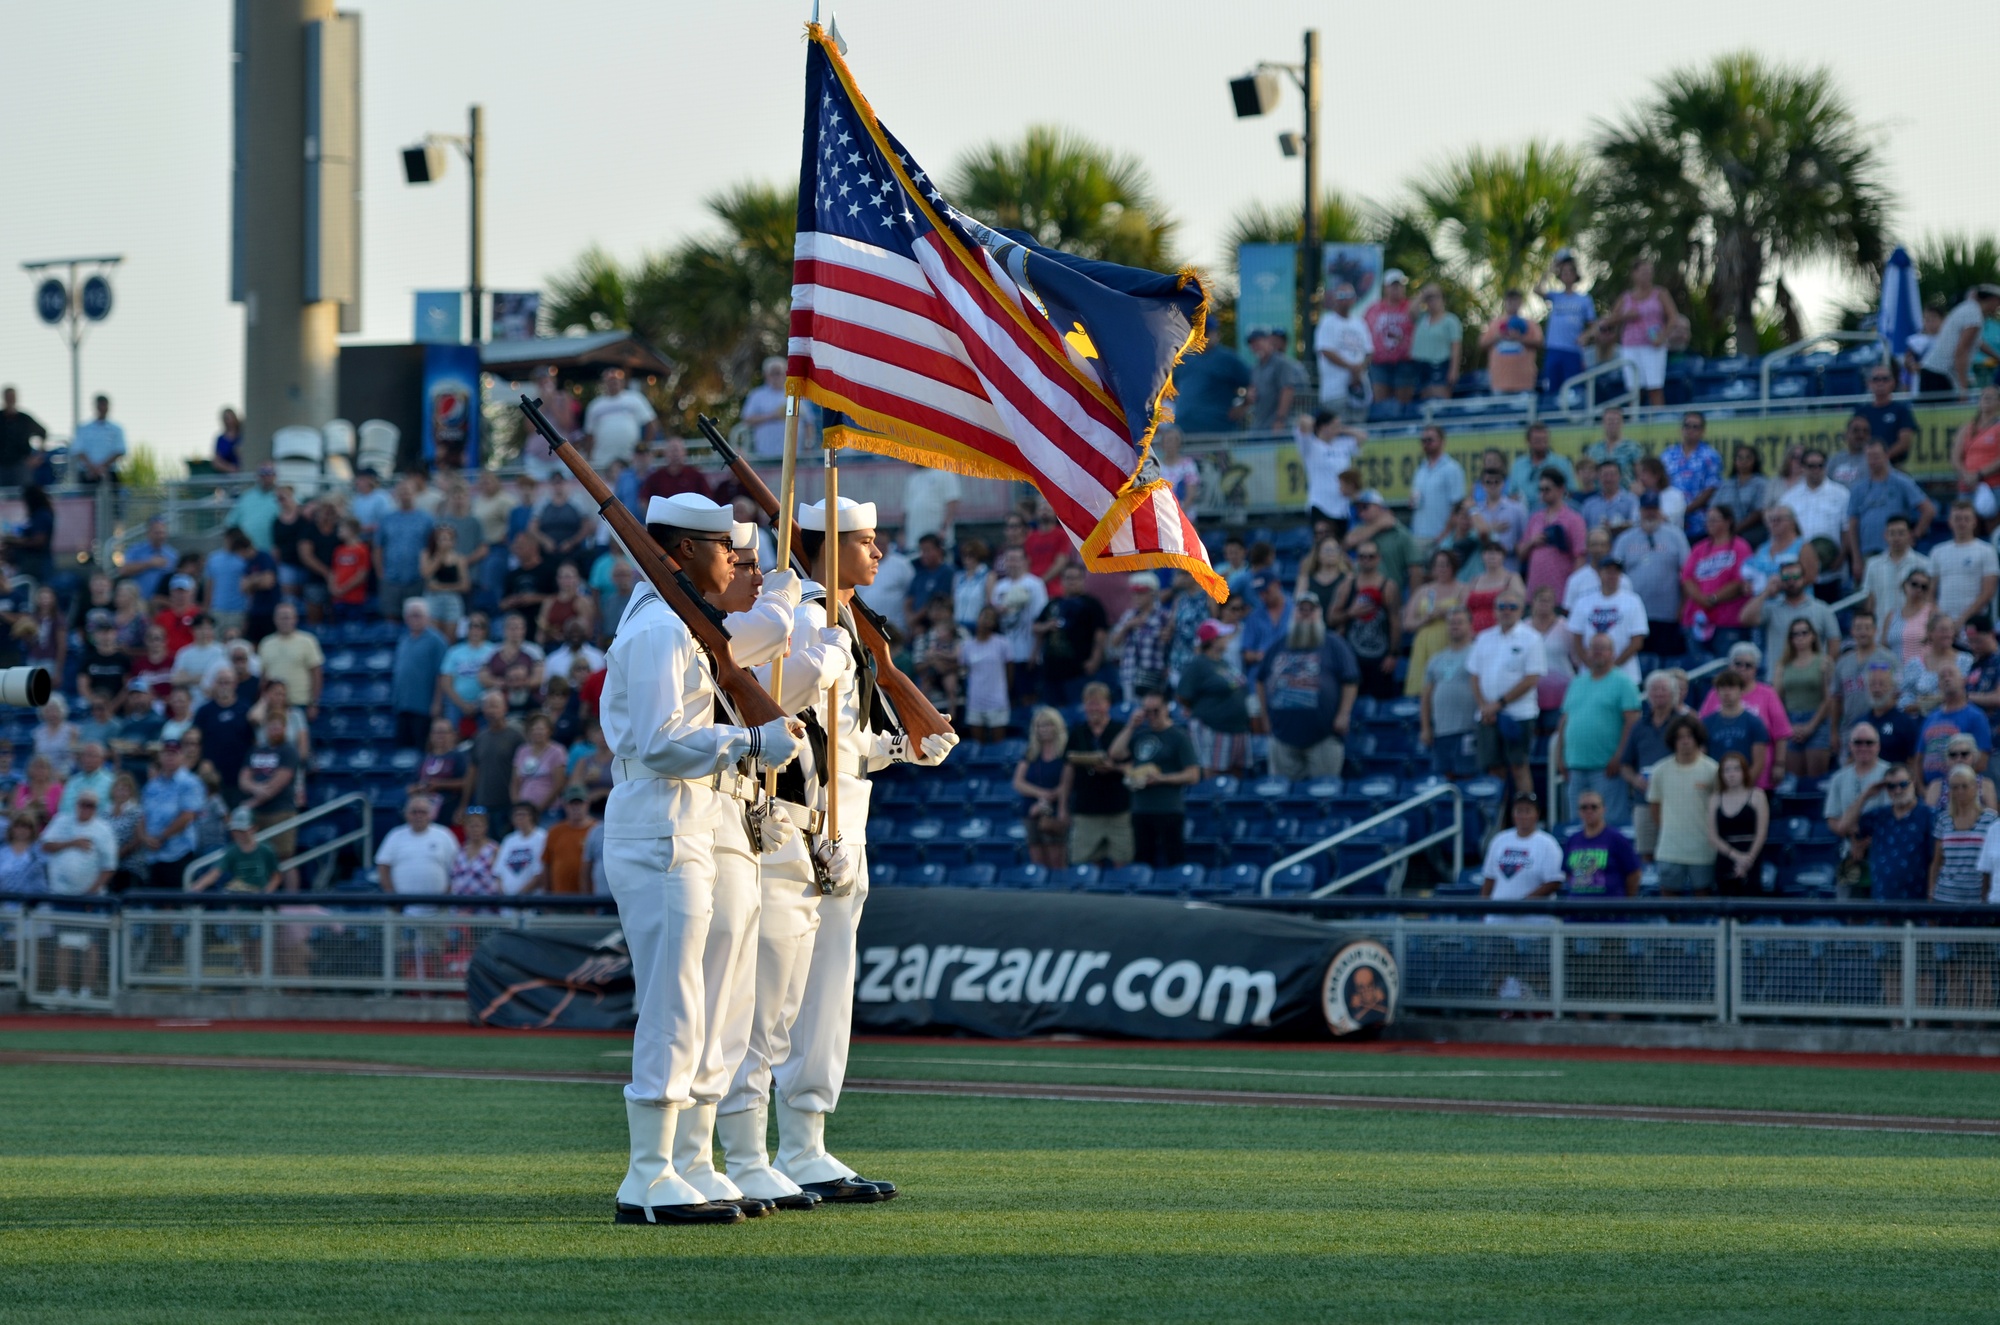 Pensacola Blue Wahoos new military mascots to honor area connection